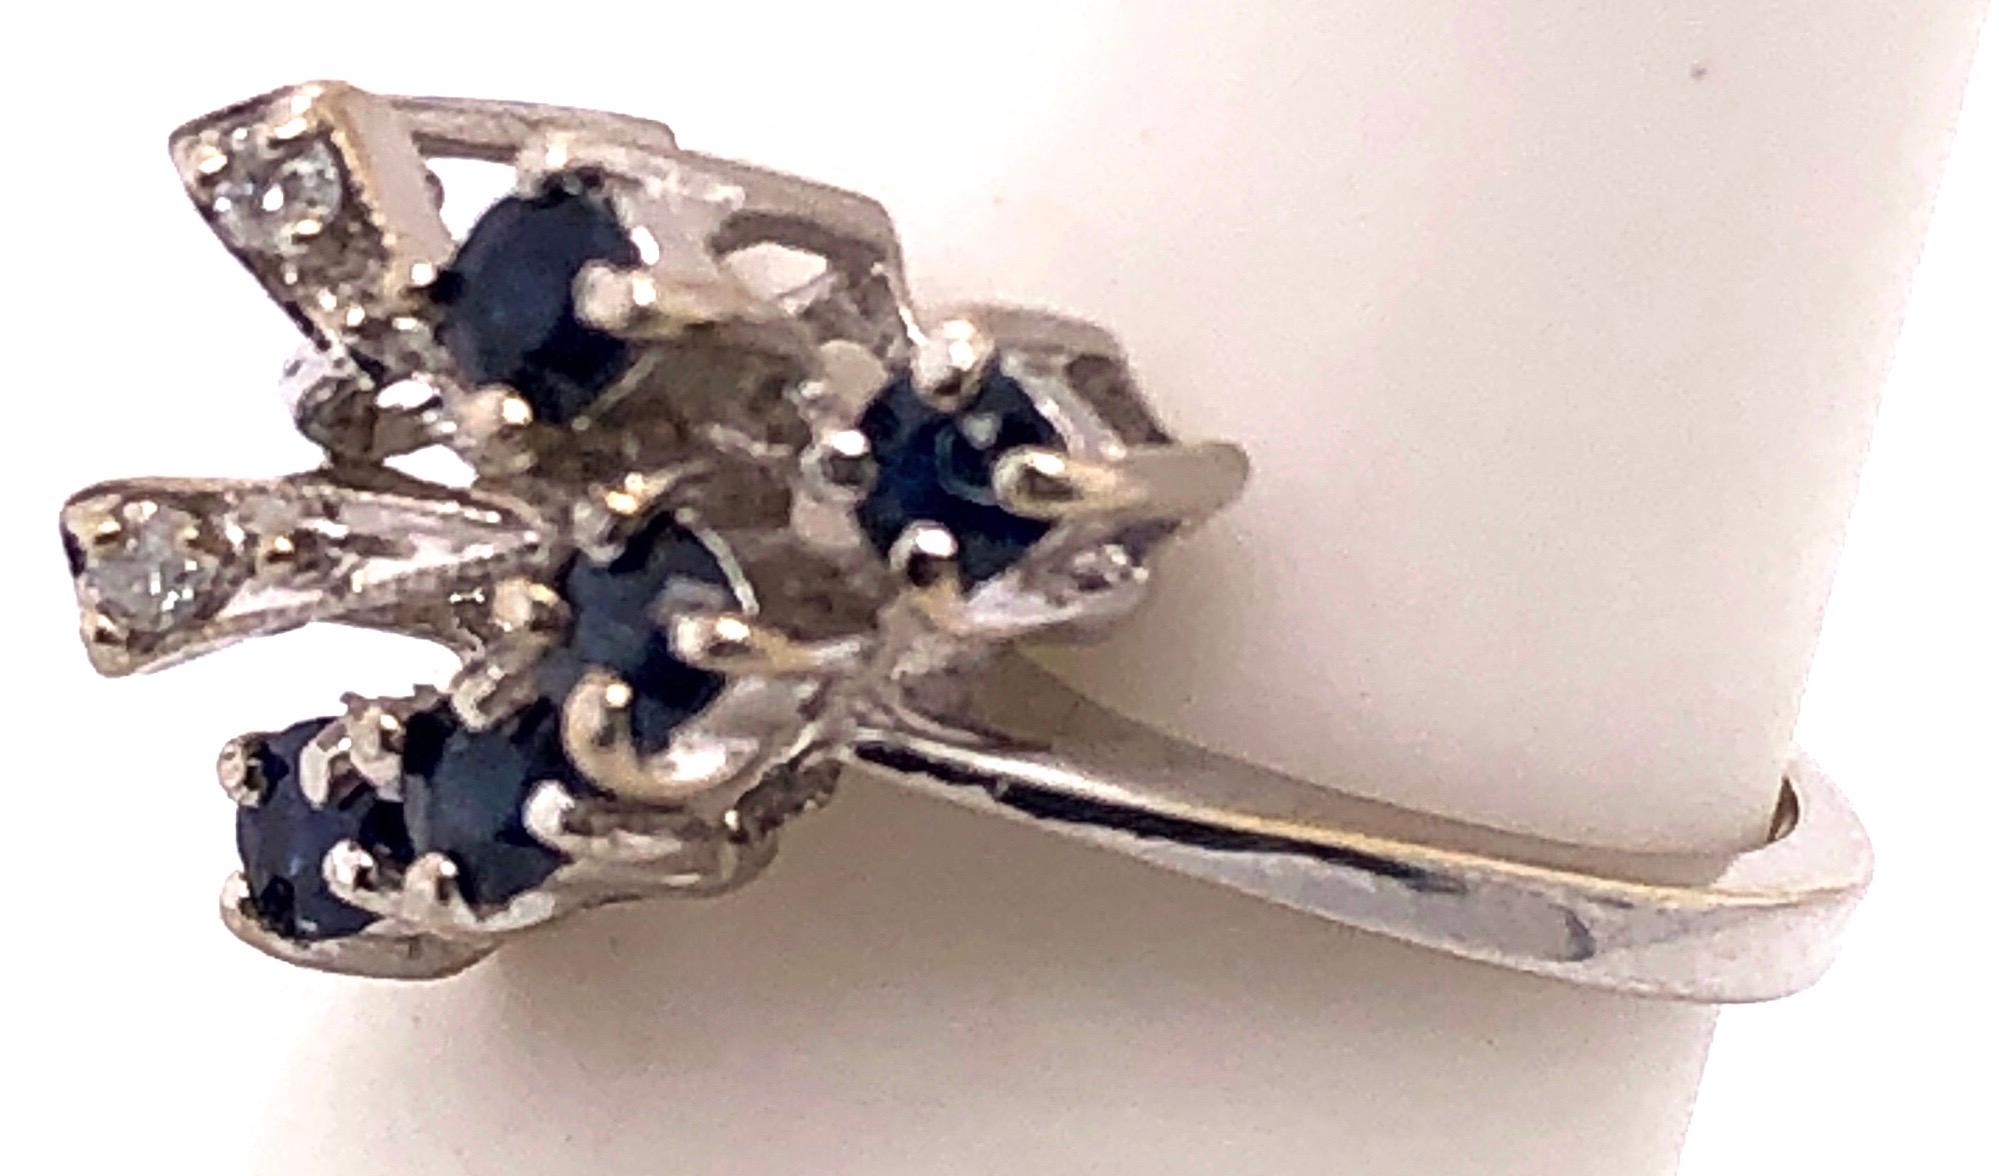 14 Karat White Gold Sapphire With Diamond Accents Free Form Ring
0.02 total diamond weight.
Size 6.5
3 grams total weight.